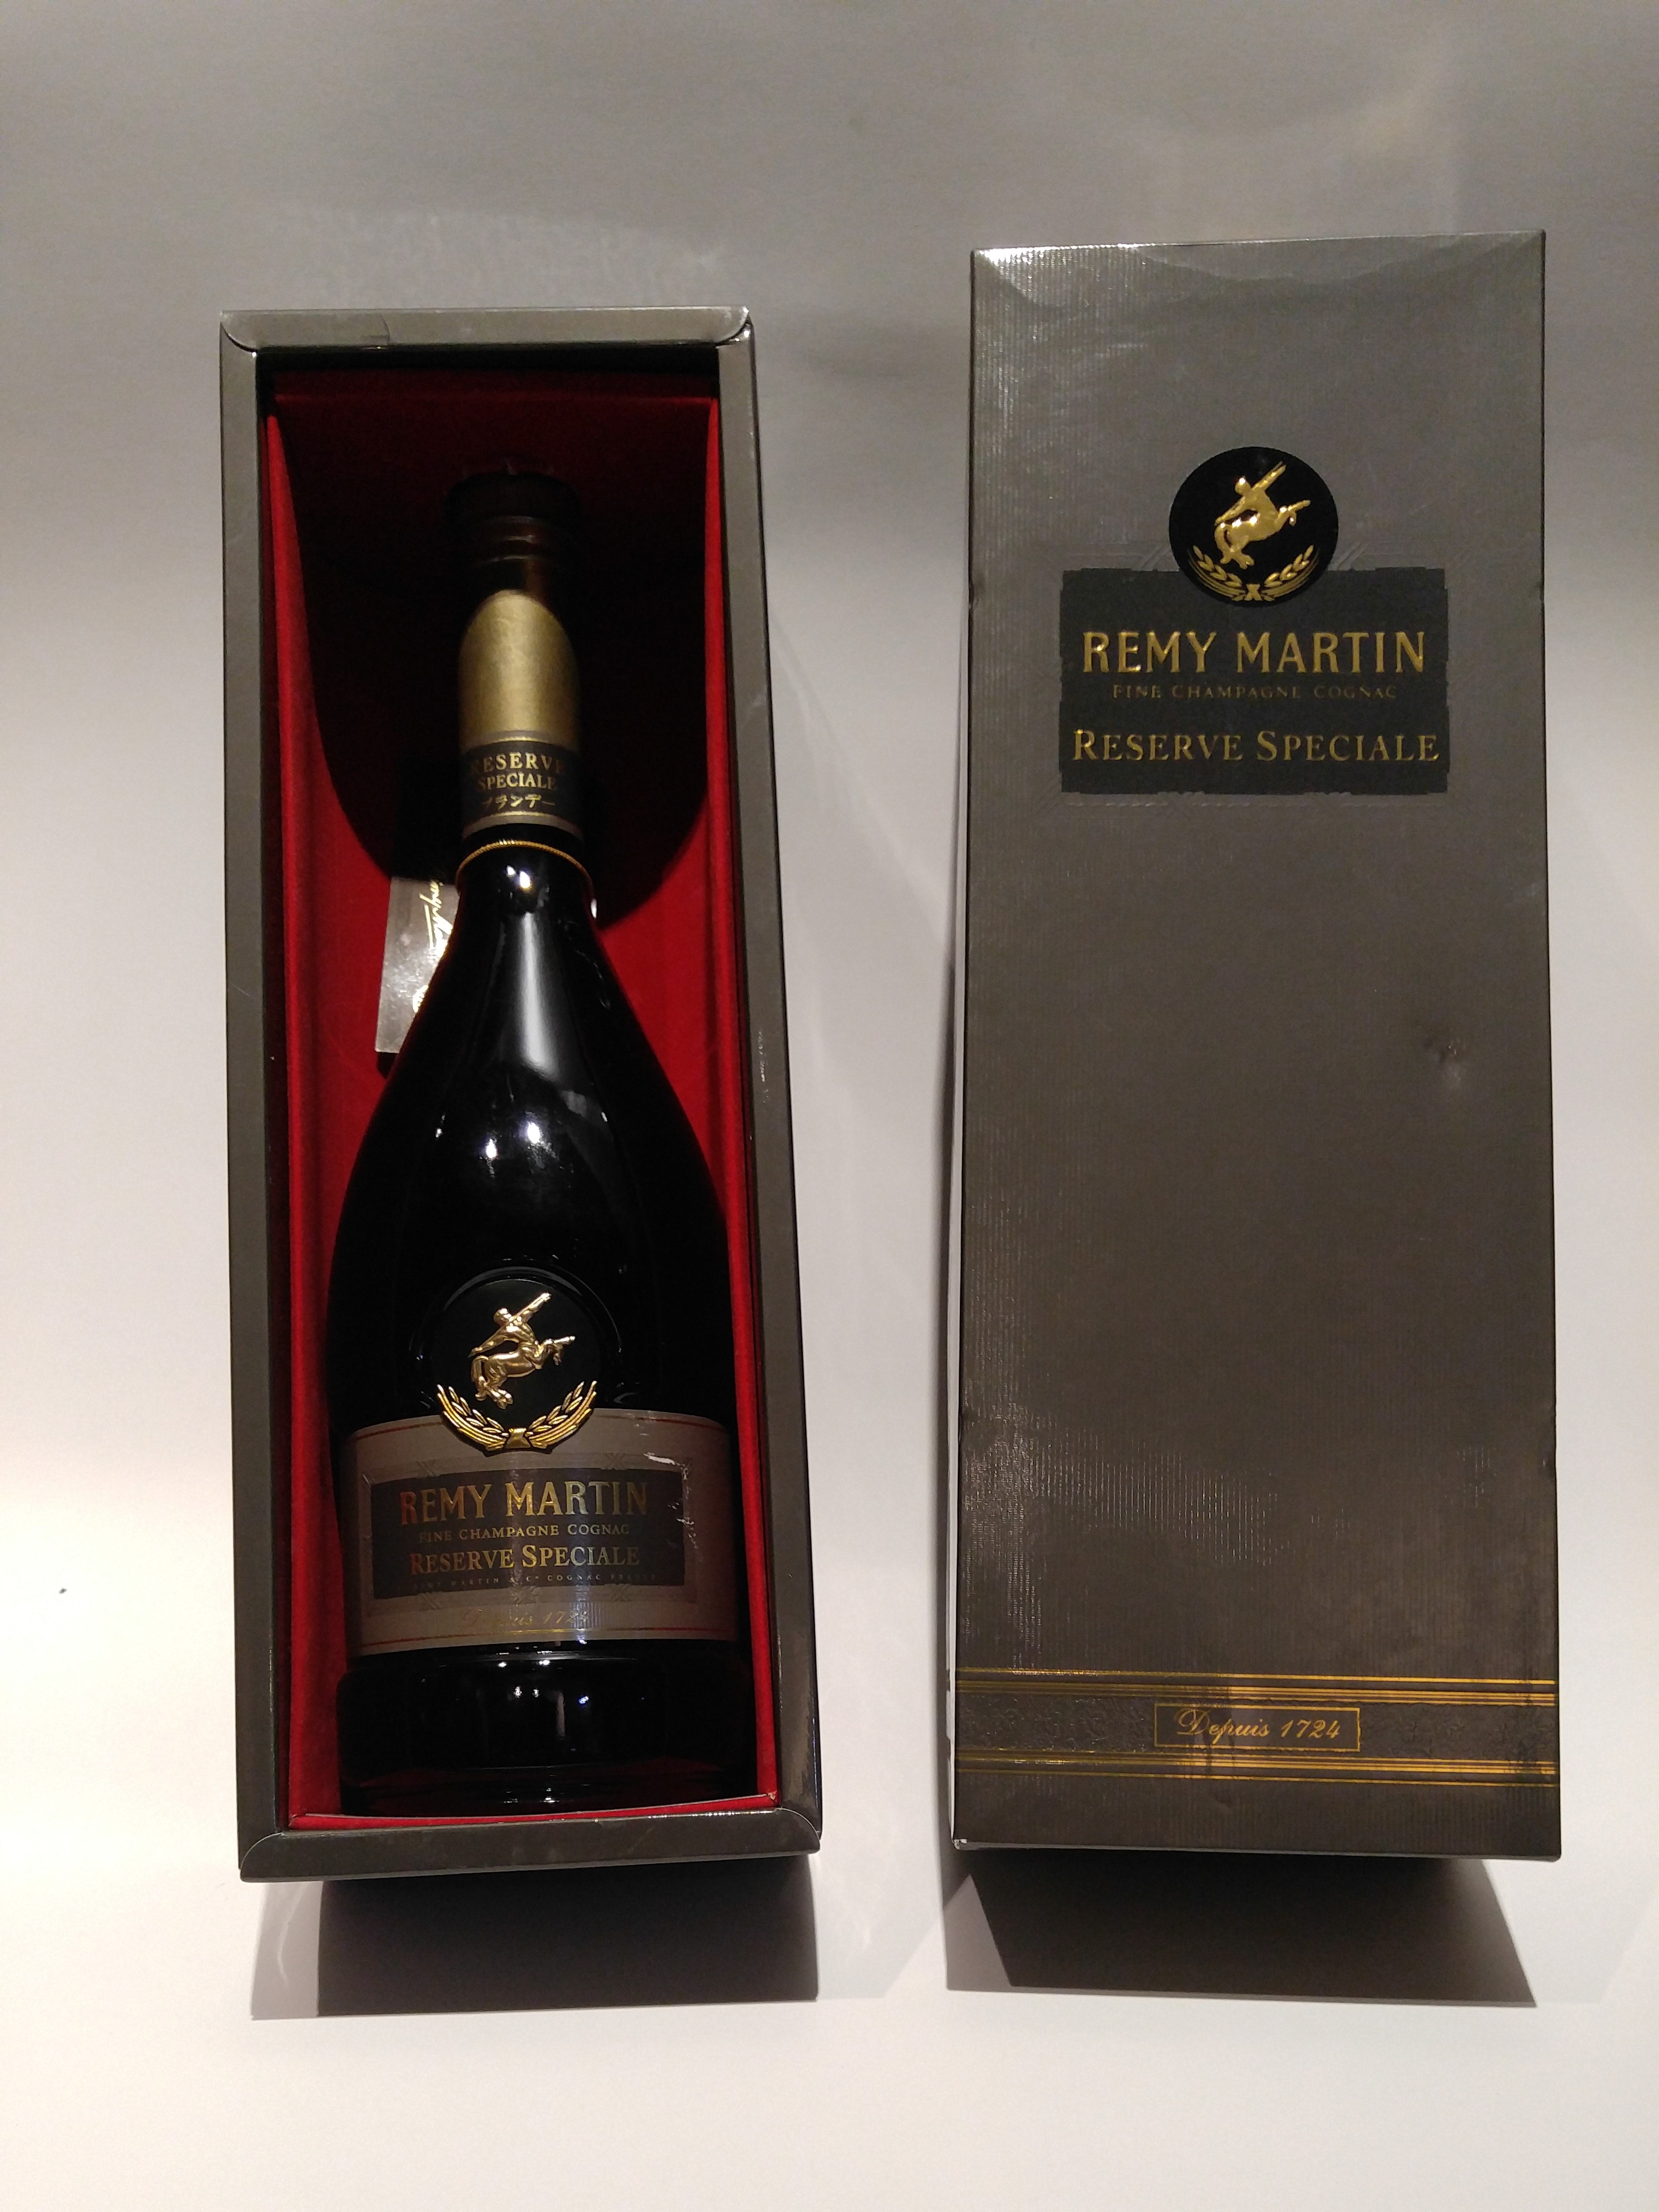 REMY MARTIN RESERVE SPECIALE - 酒